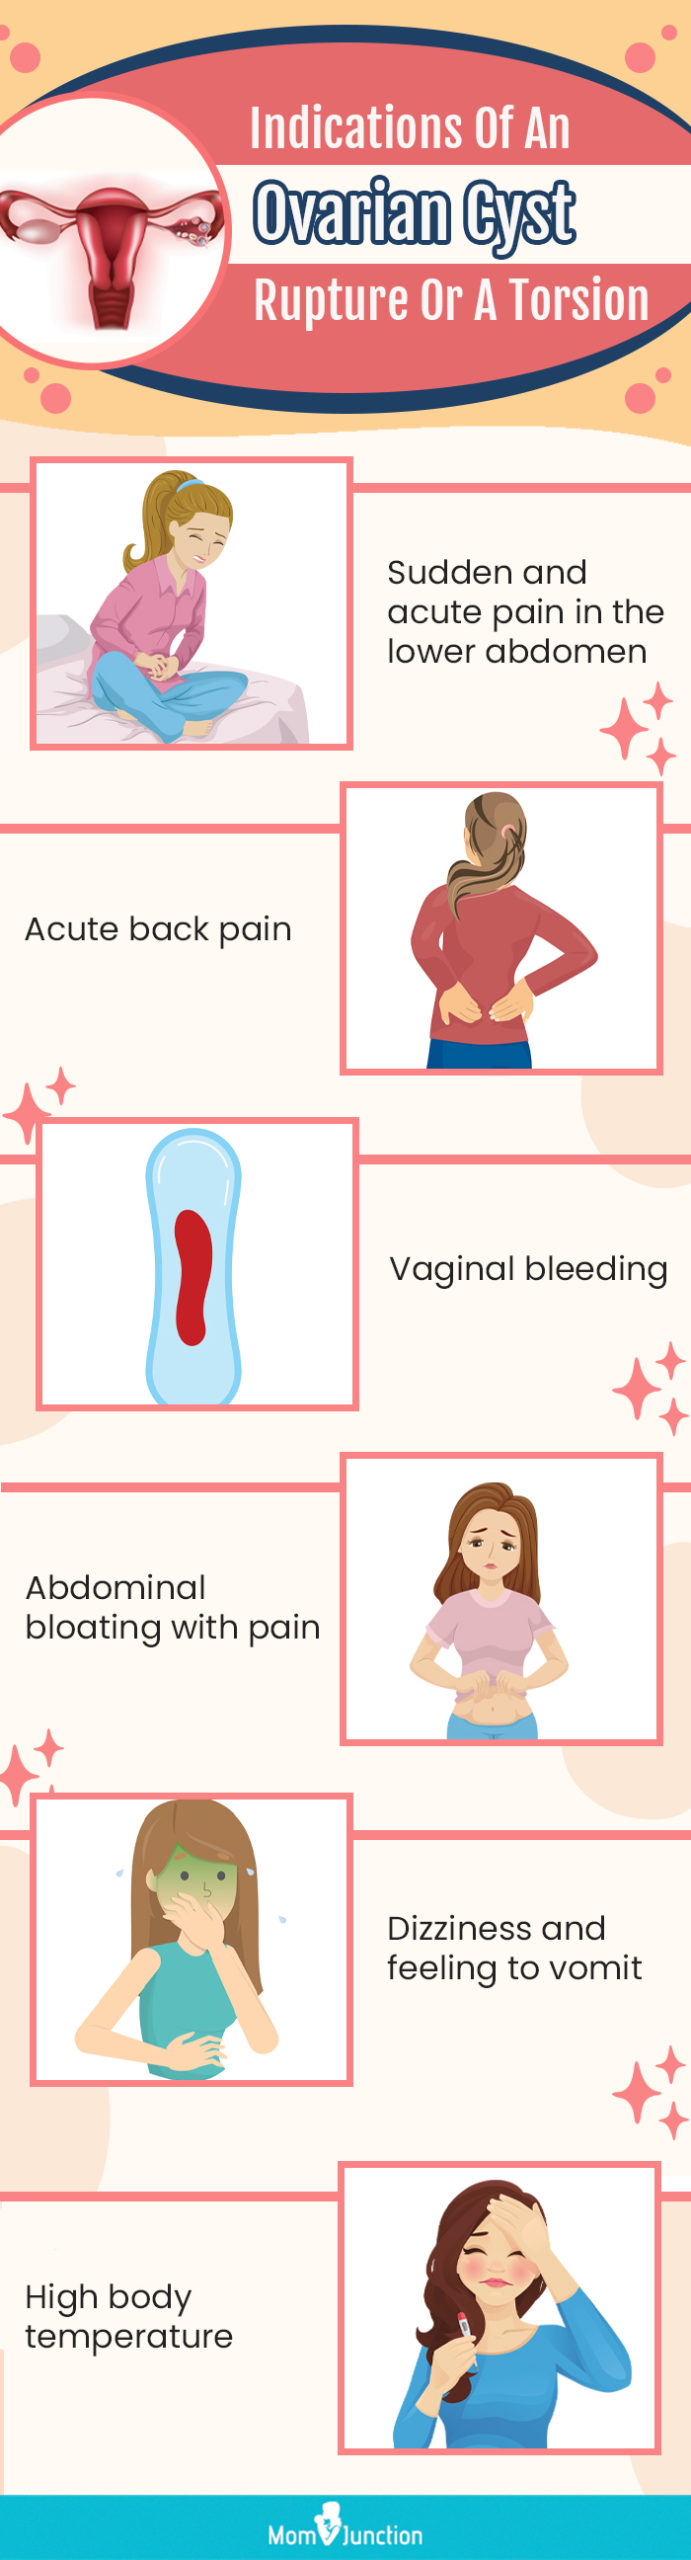 indications of an ovarian cyst rupture or a torsion (infographic)